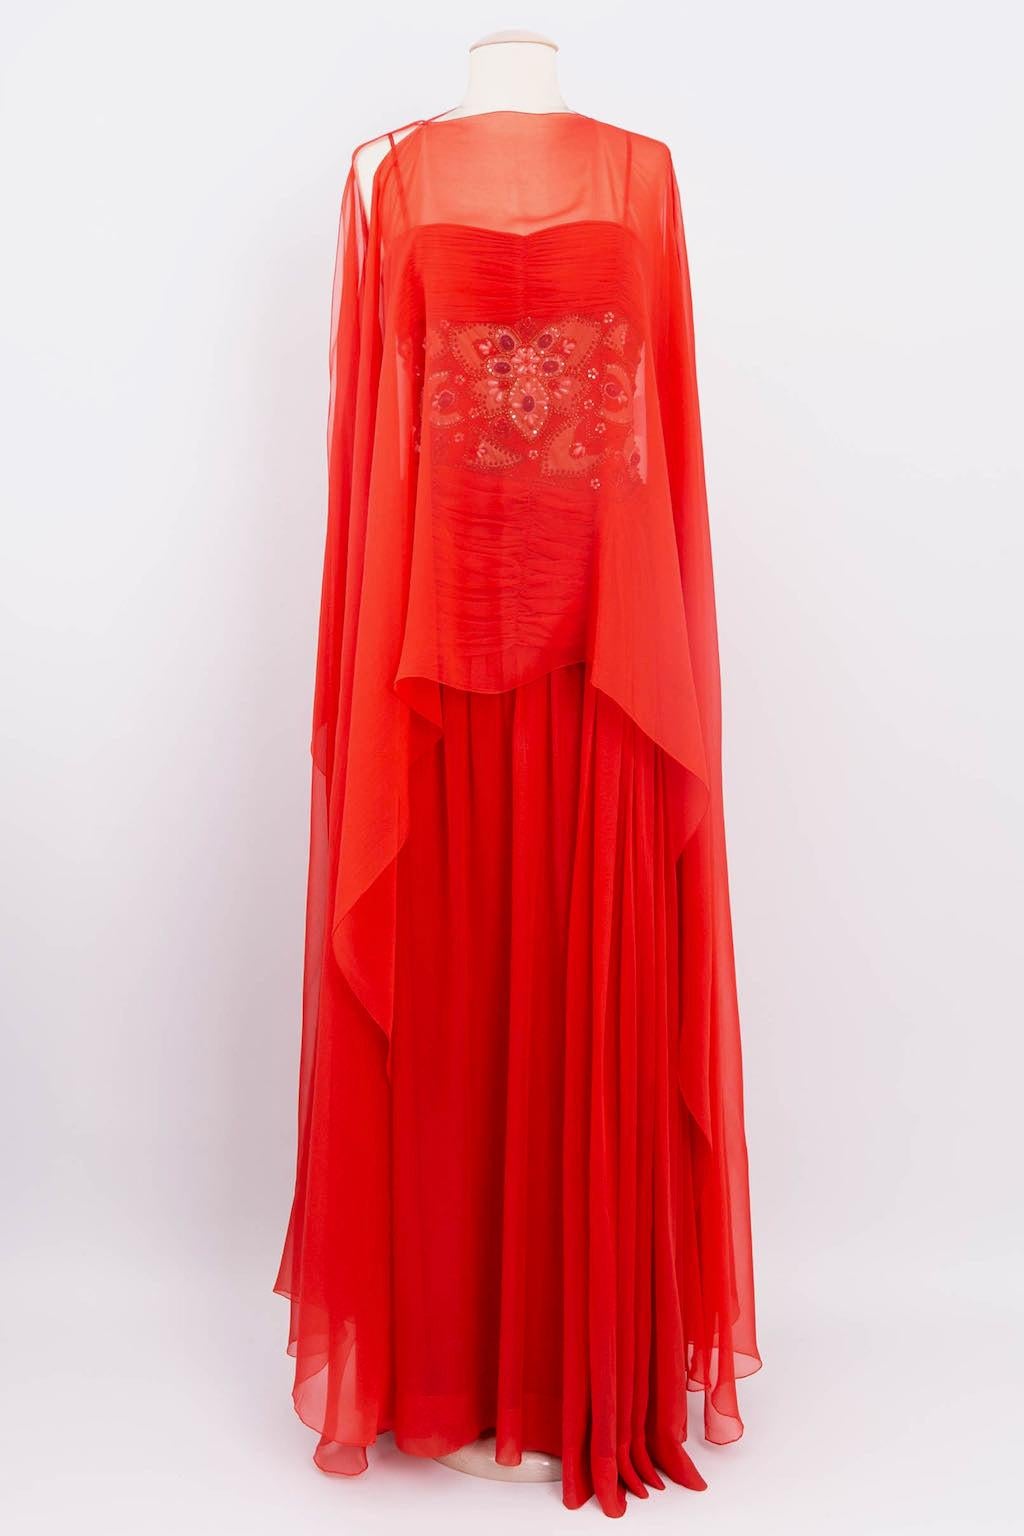 Givenchy Haute Couture Bustier Embroidered Silk Chiffon Dress For Sale 2